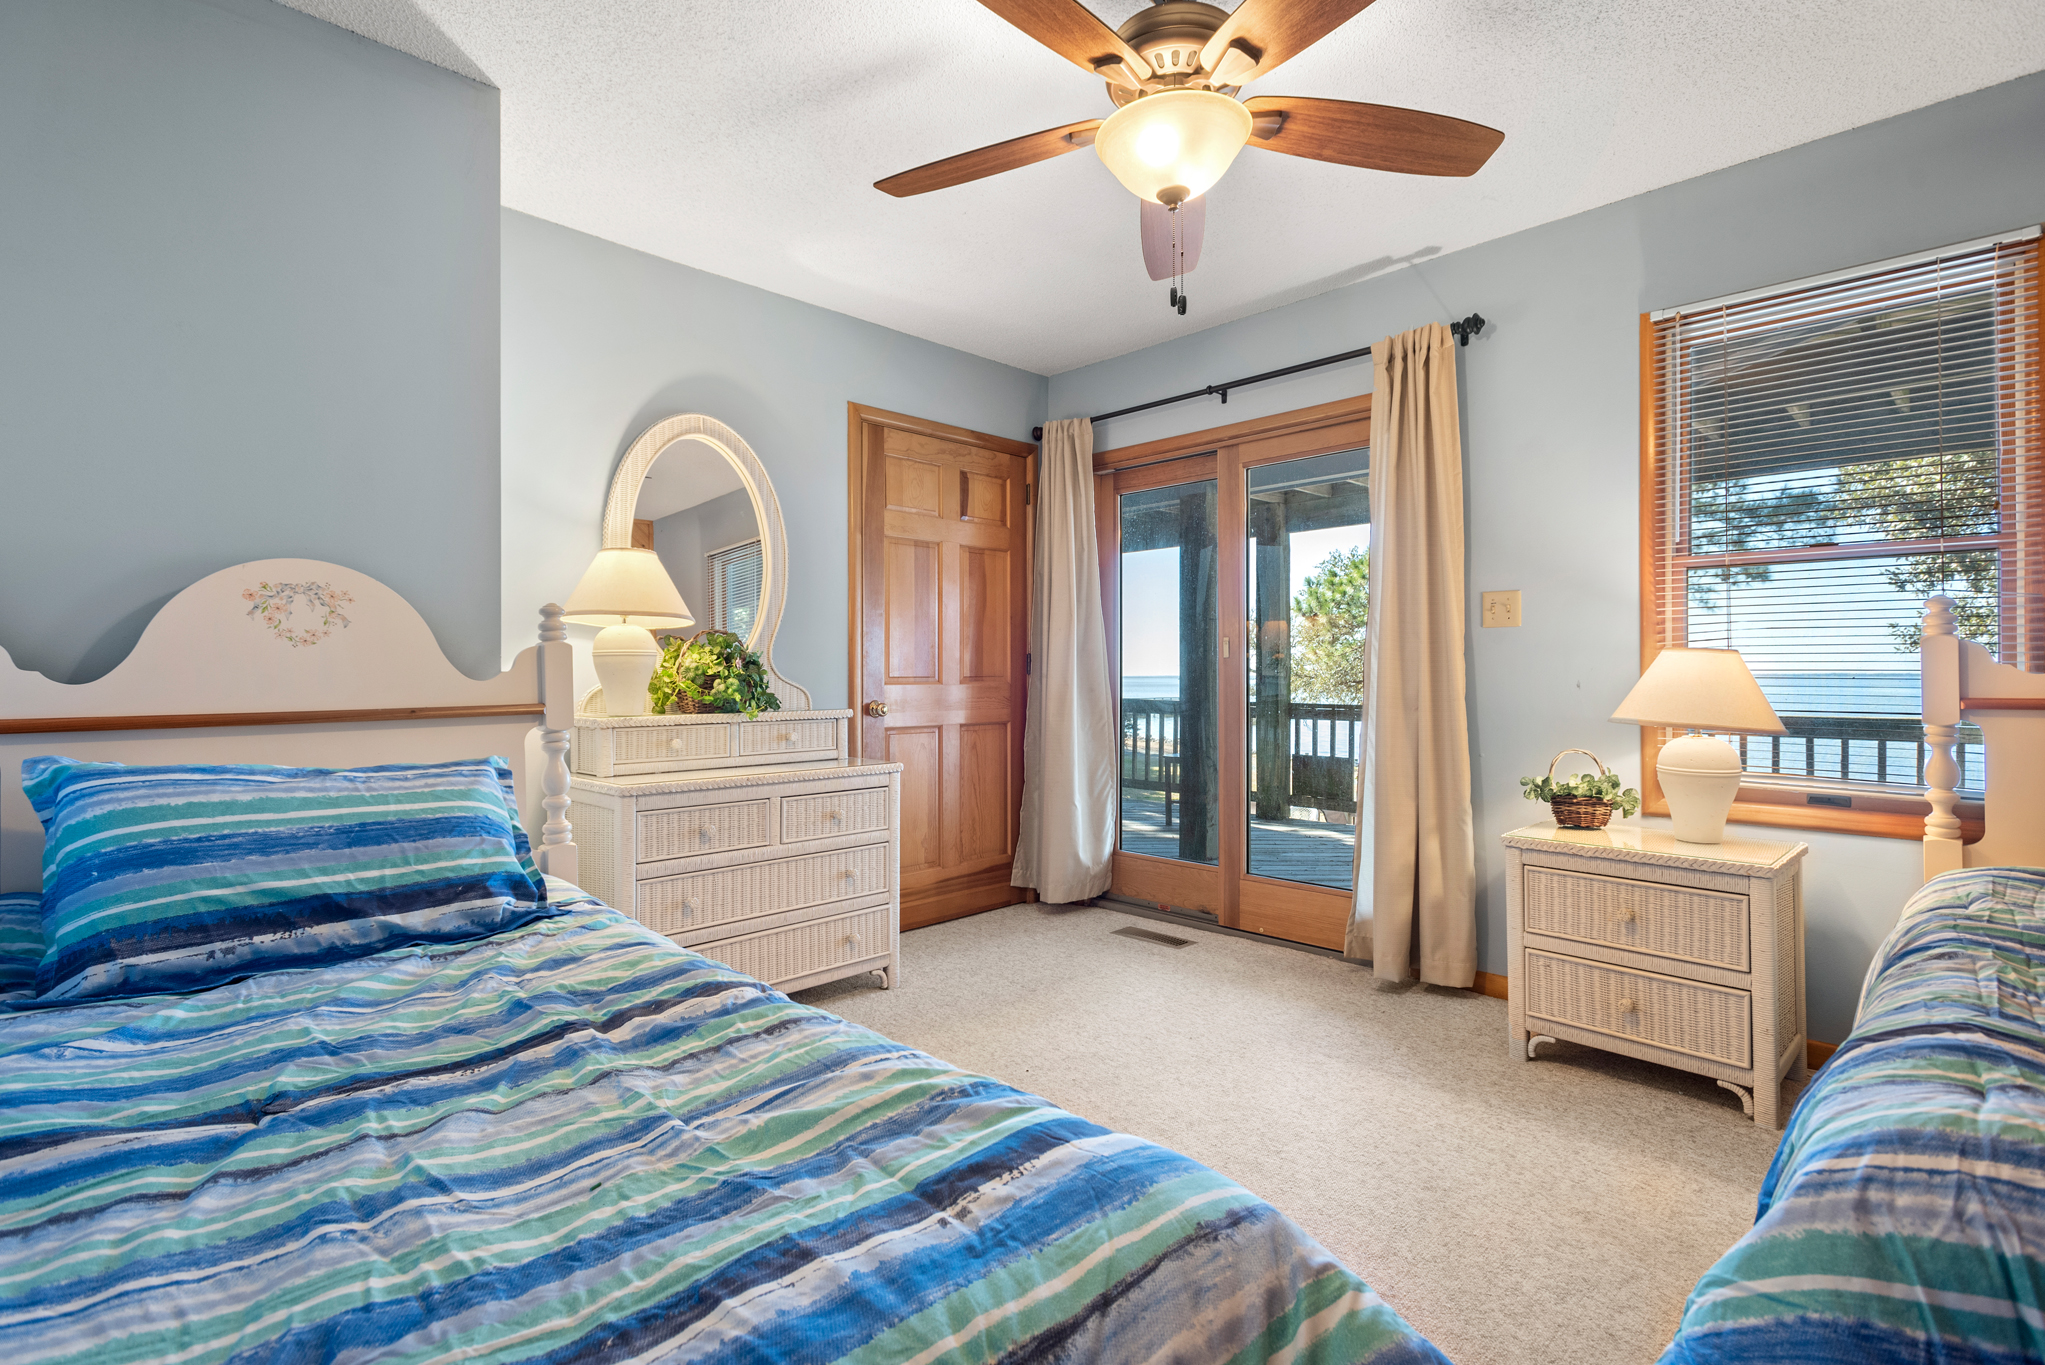 CL344: Tequila Sunset | Mid Level Bedroom 1